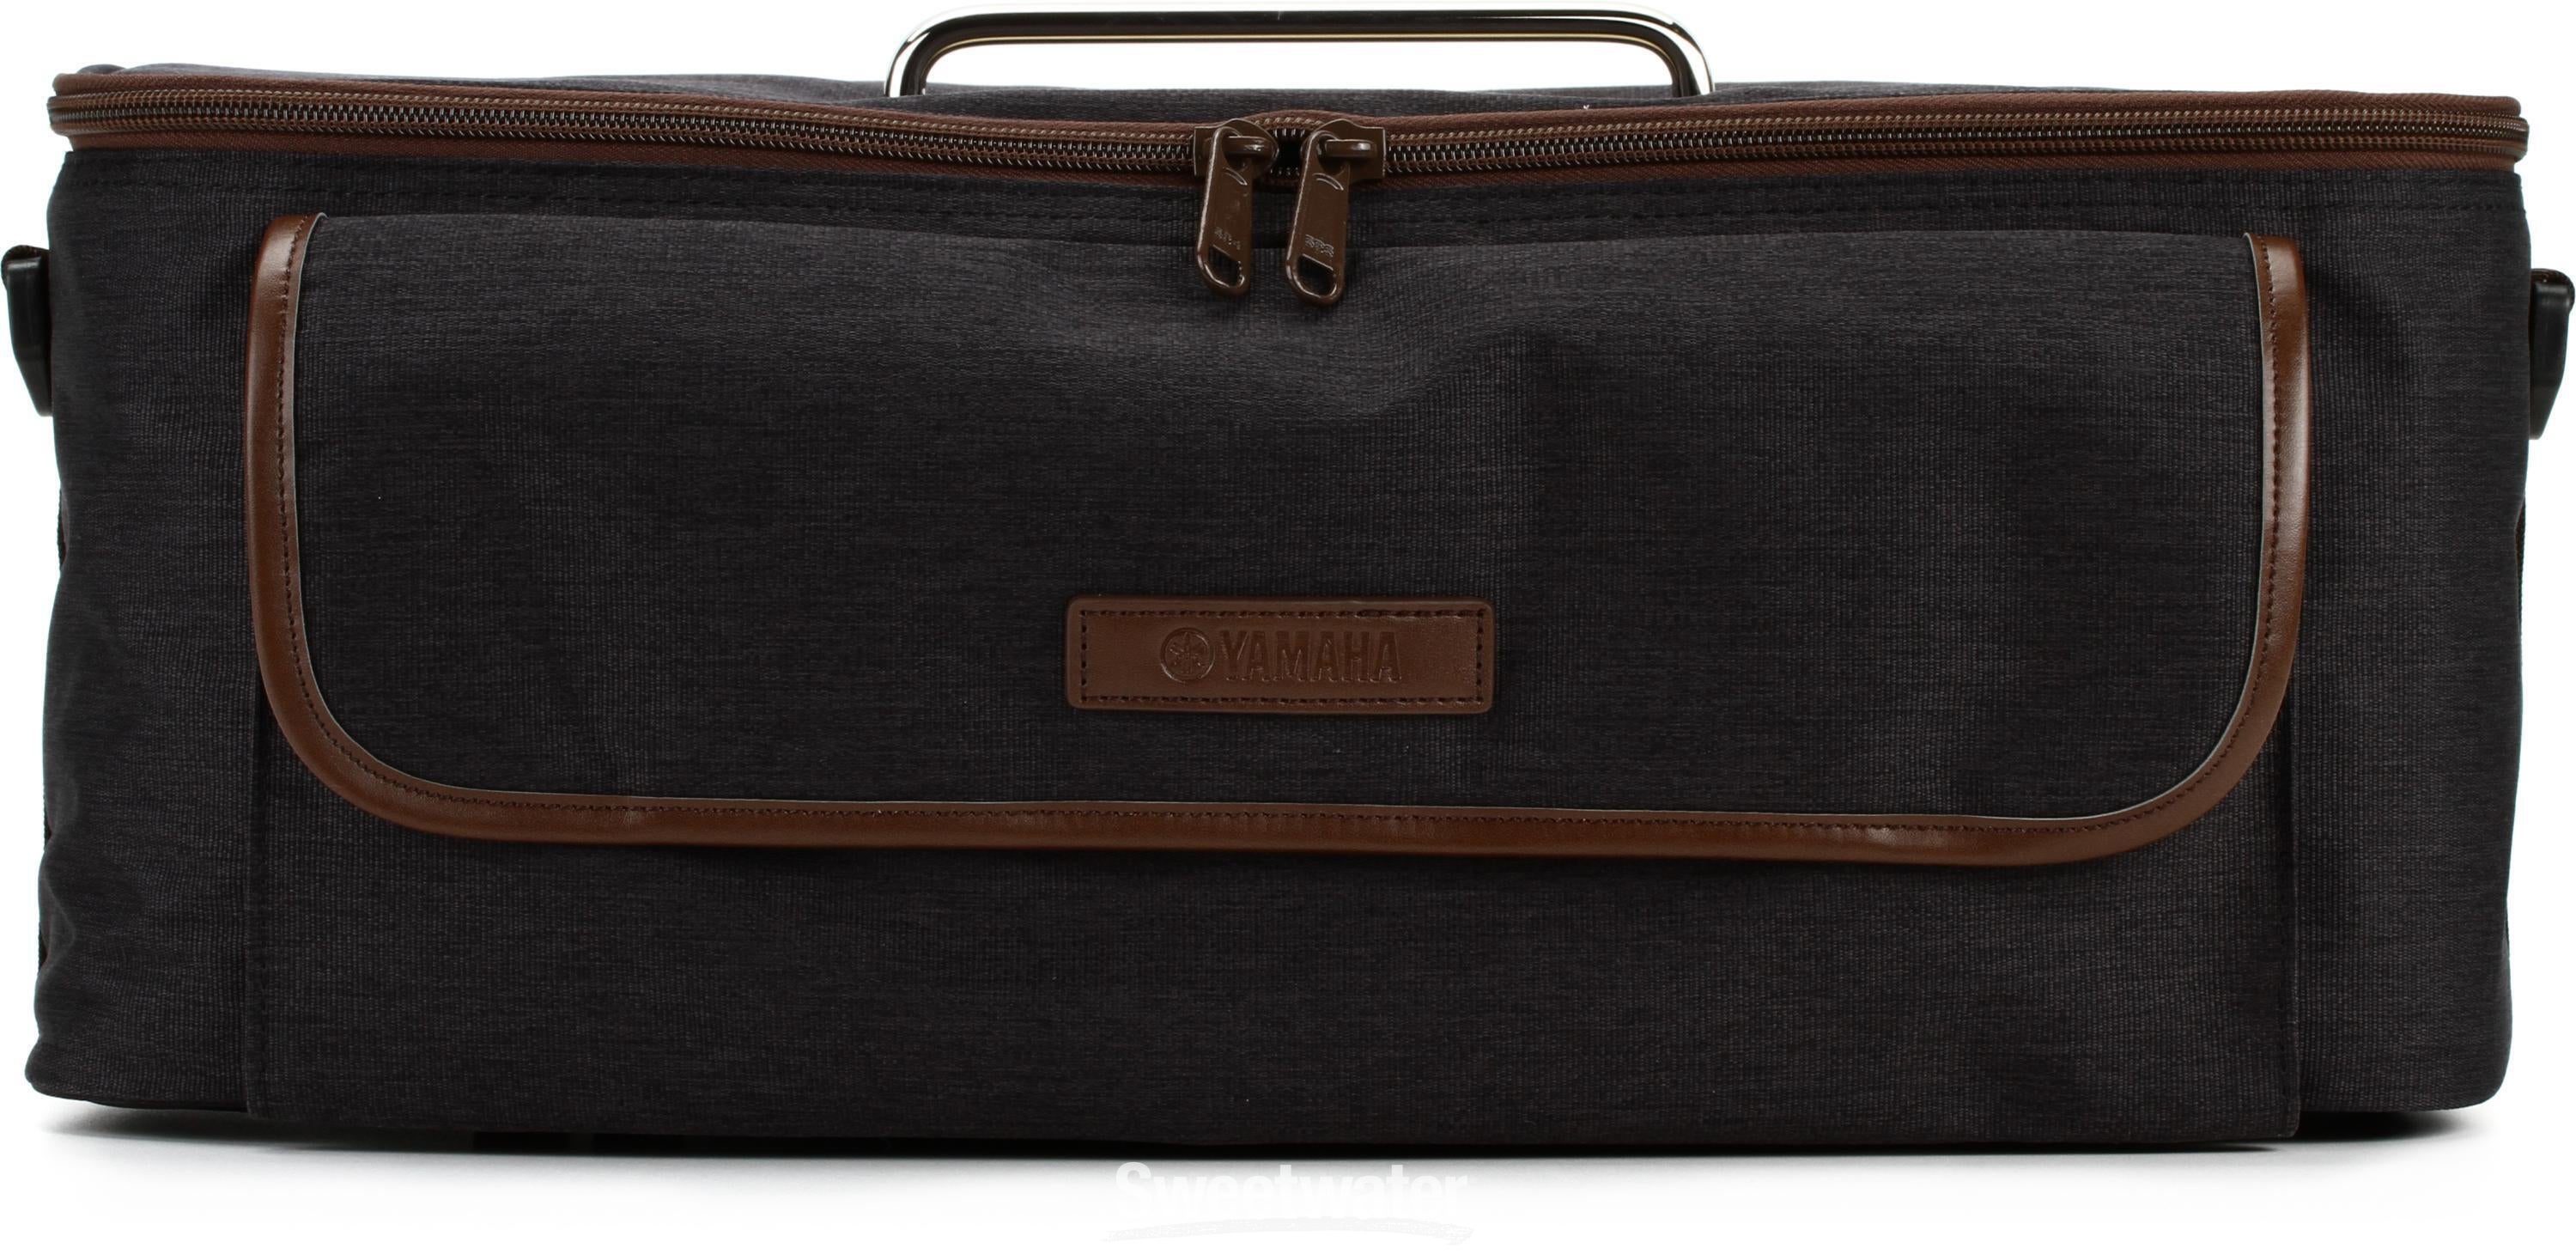 Yamaha Carry Bag for THR Series Amps